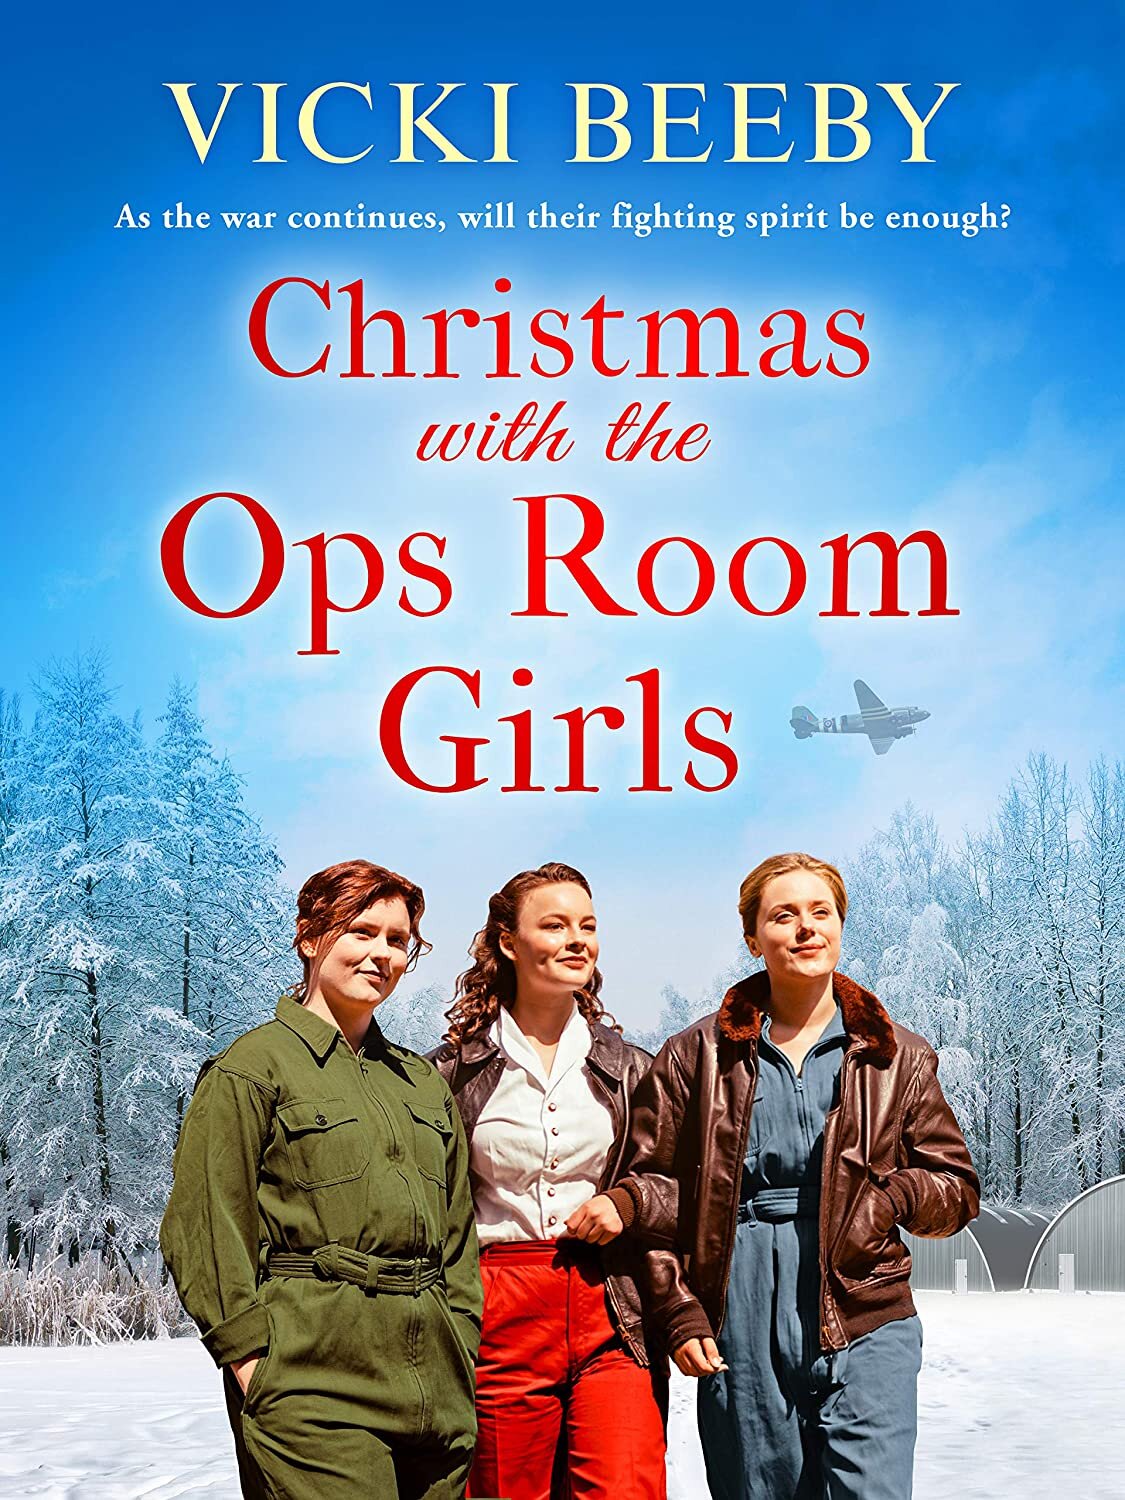 Christmas With The Ops Room Girls by Vicky Beeby.jpg